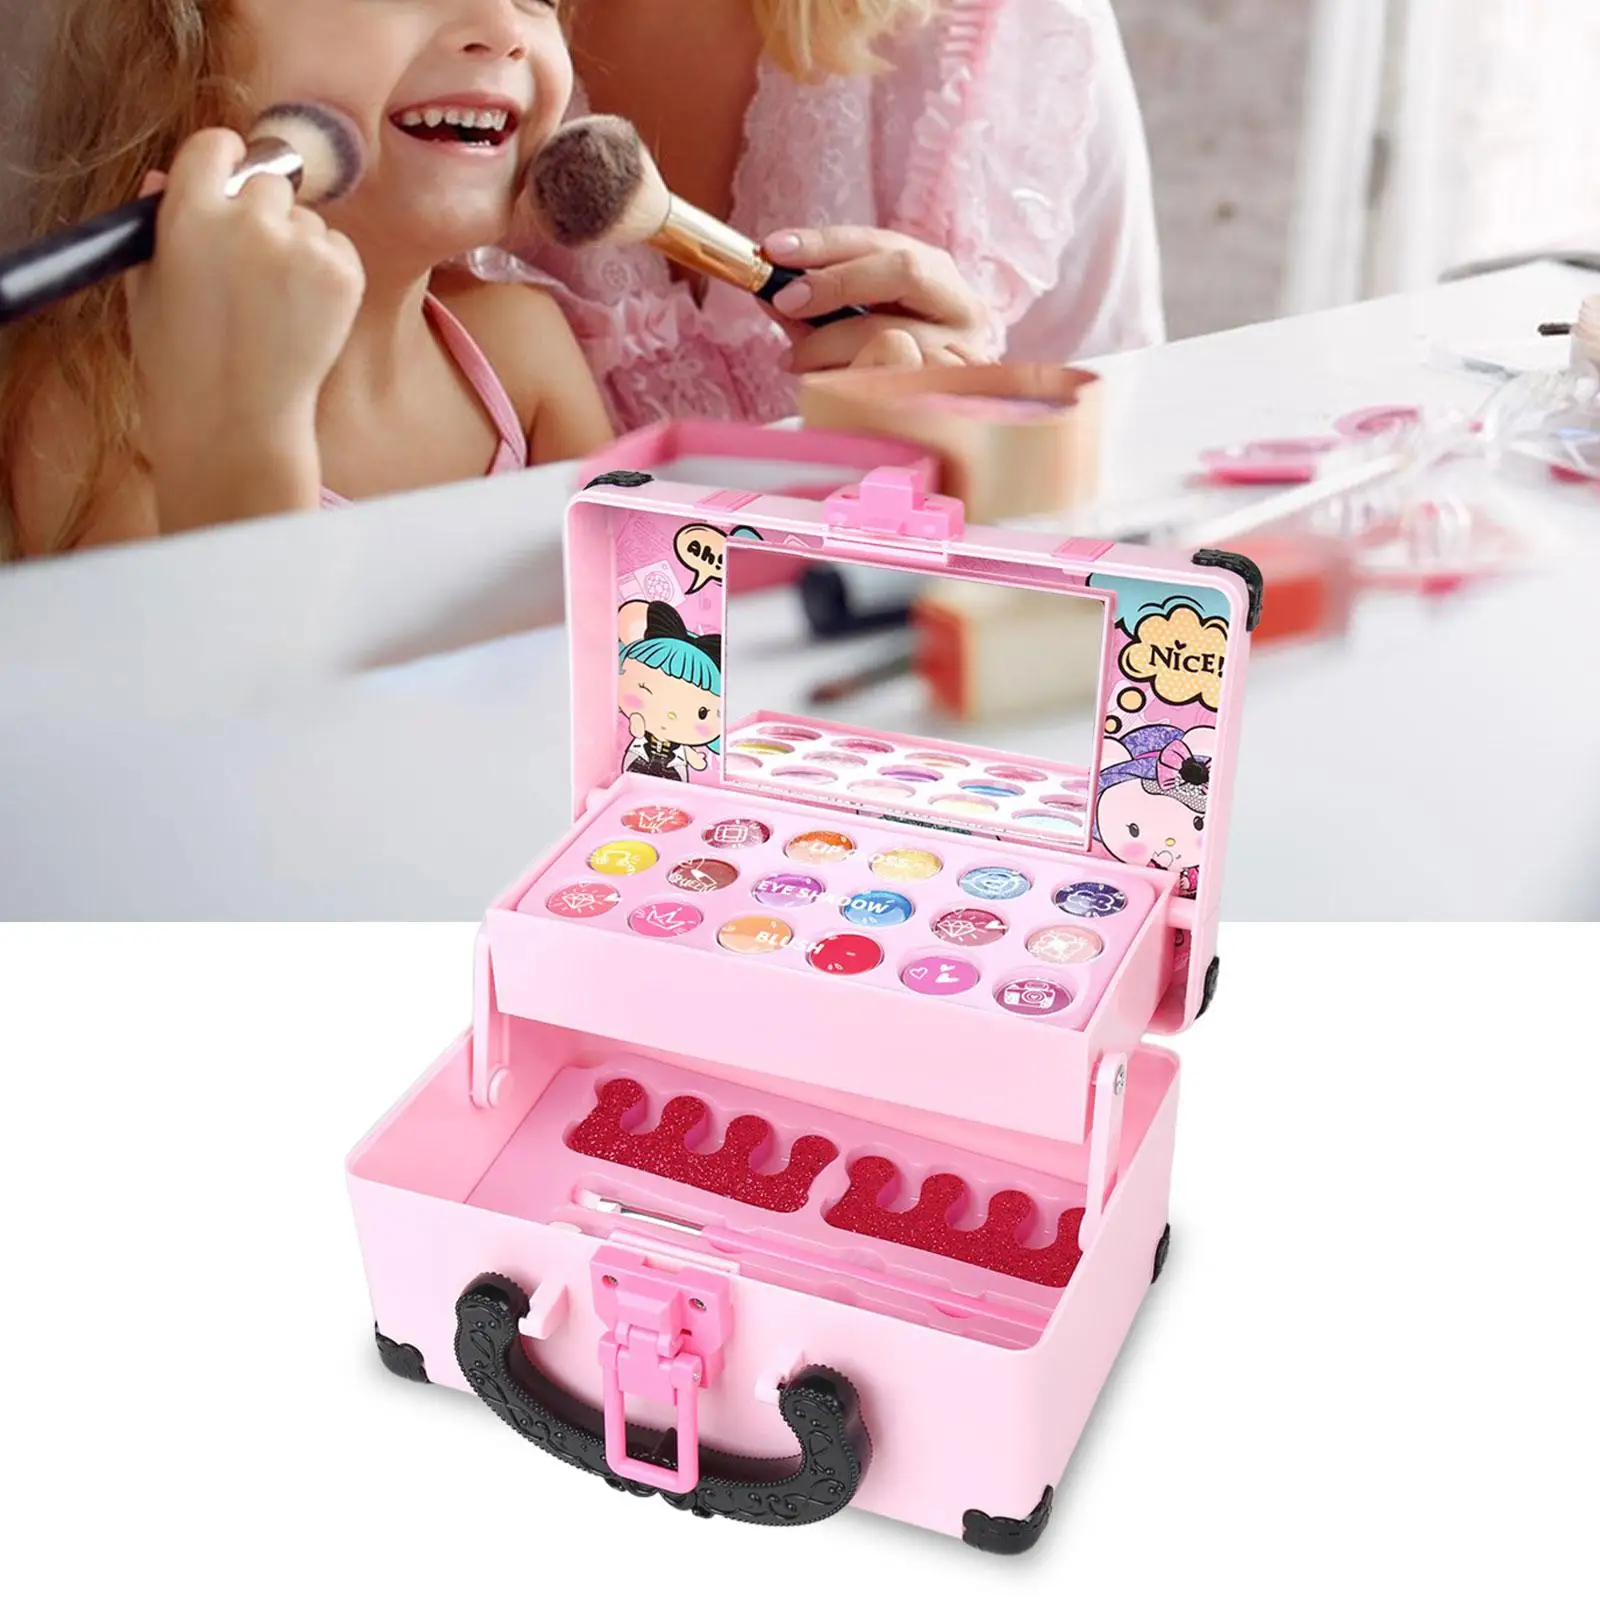 Pretend Play Makeup Toy Set Pretend Makeup Accessories Children Makeup Playing Box for Toddlers Children Girls Birthday Gifts